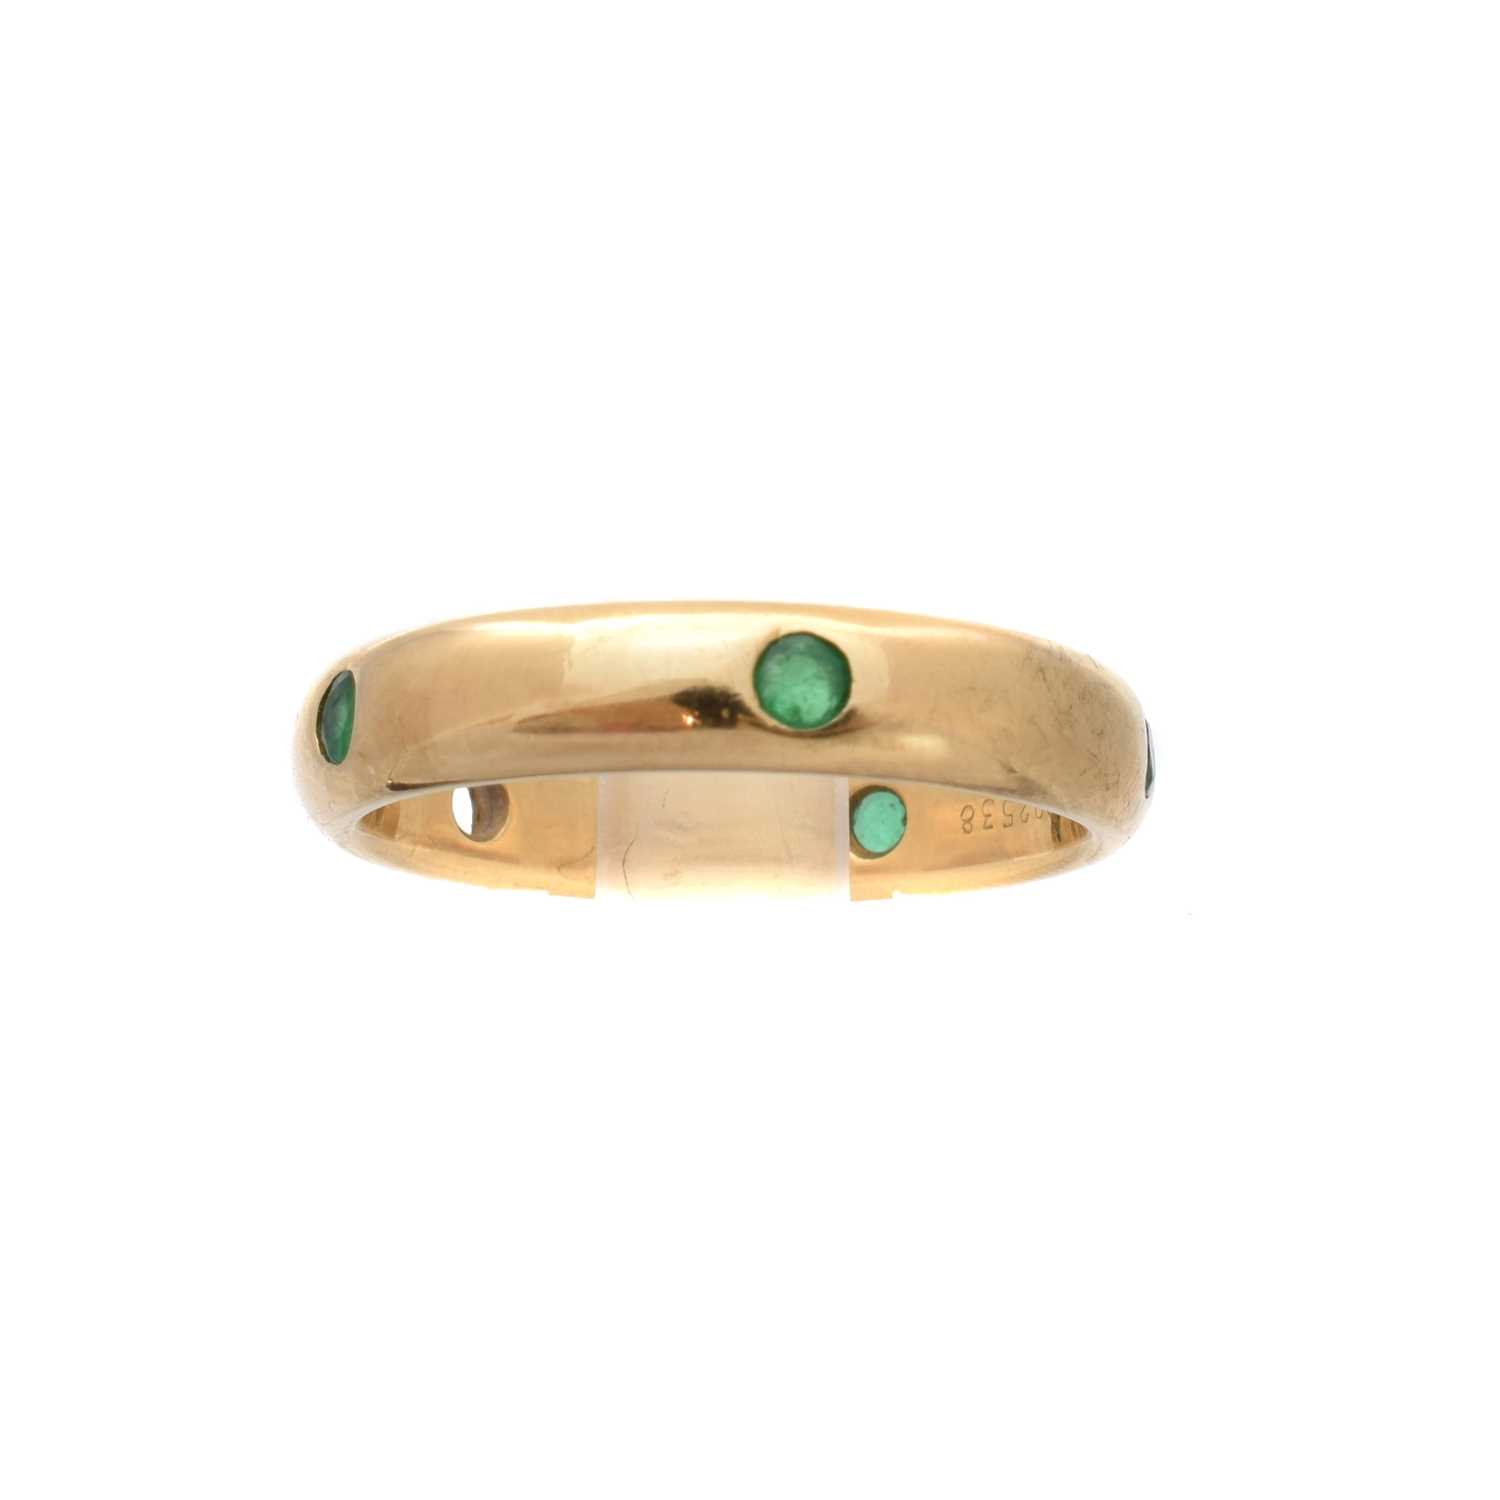 Lot 190 - An 18ct gold emerald 'Stella' ring by Cartier